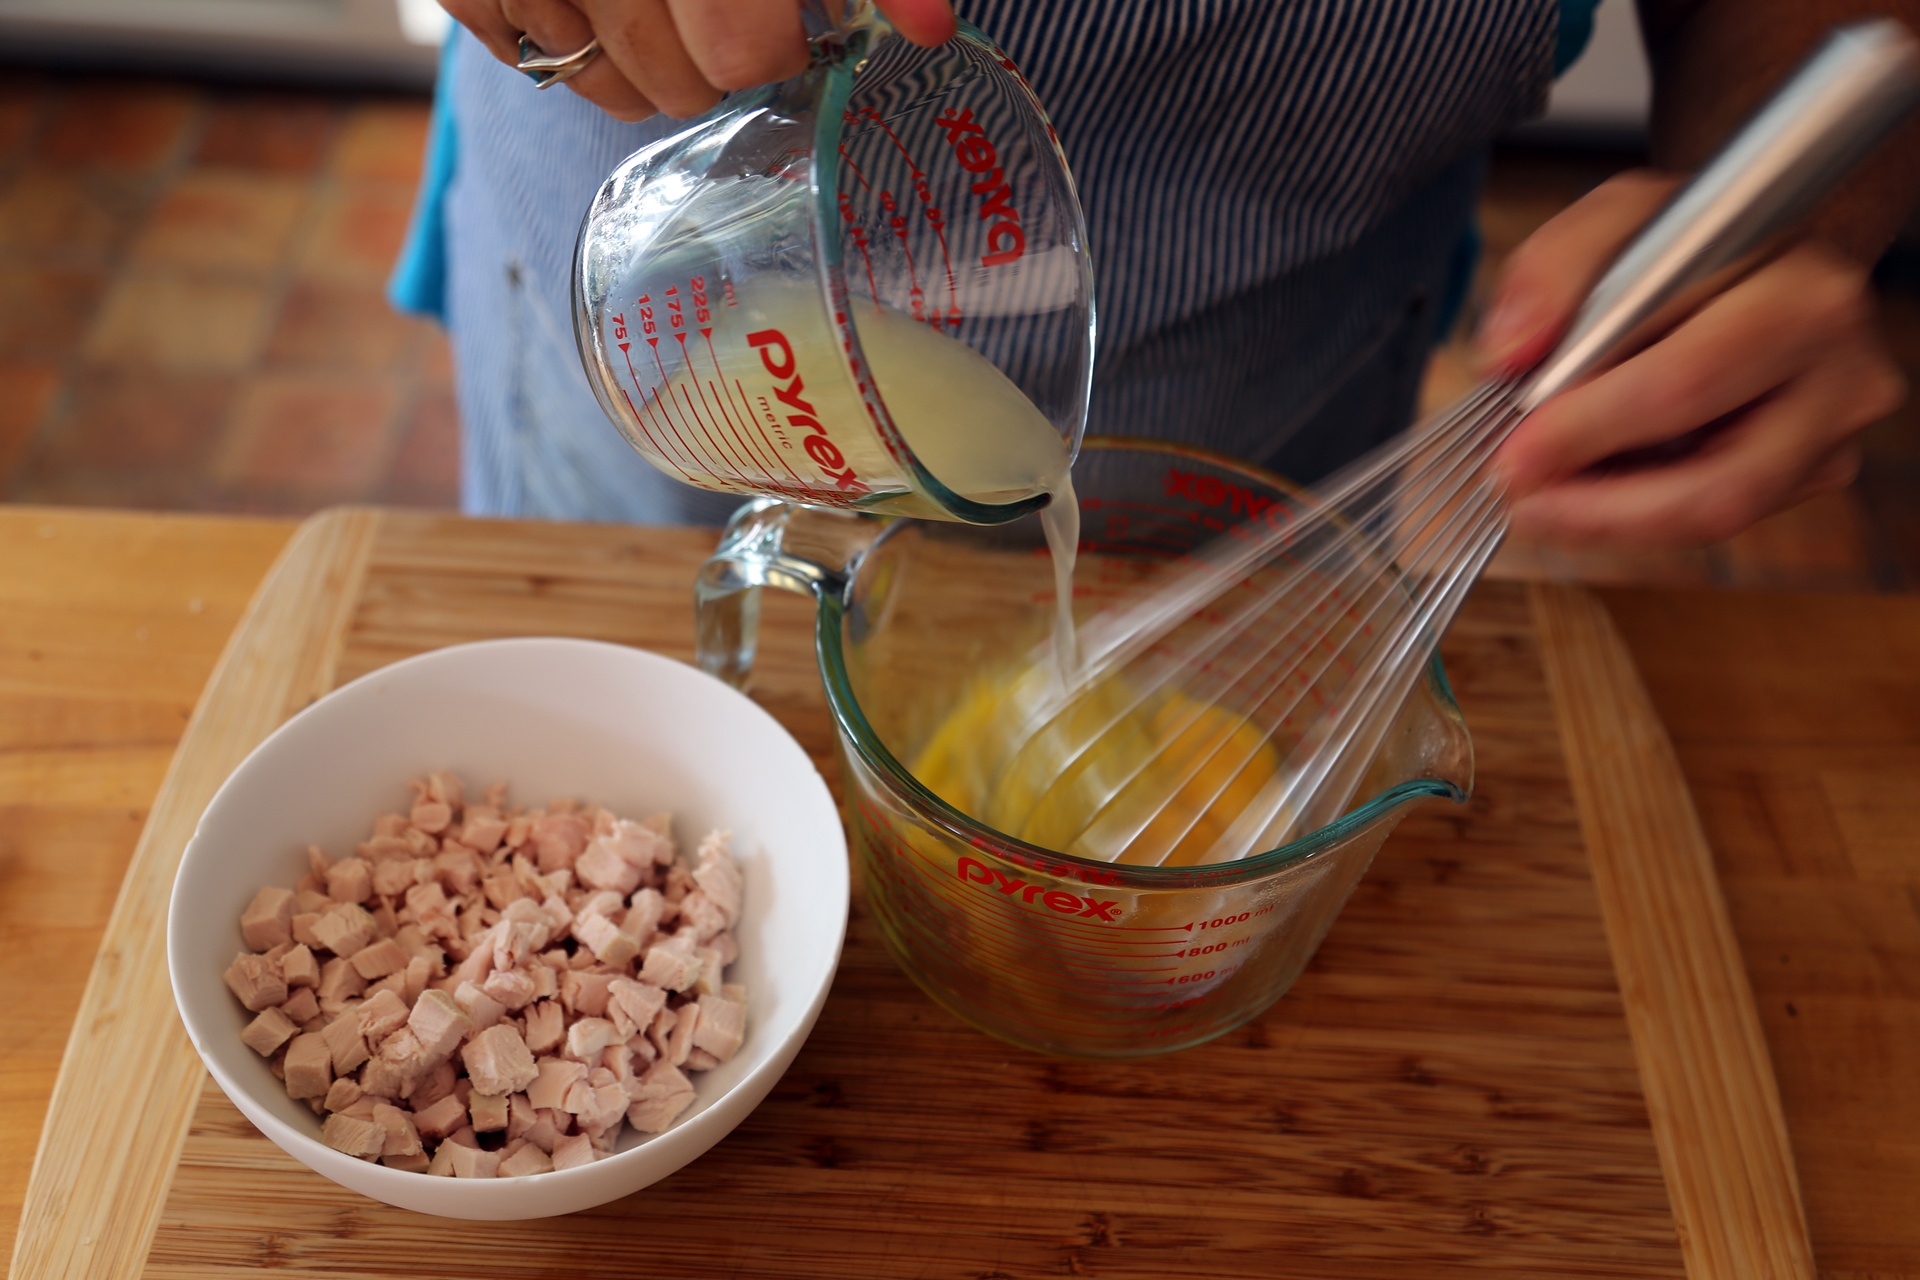 In a bowl, whisk together the eggs and lemon juice until smooth.